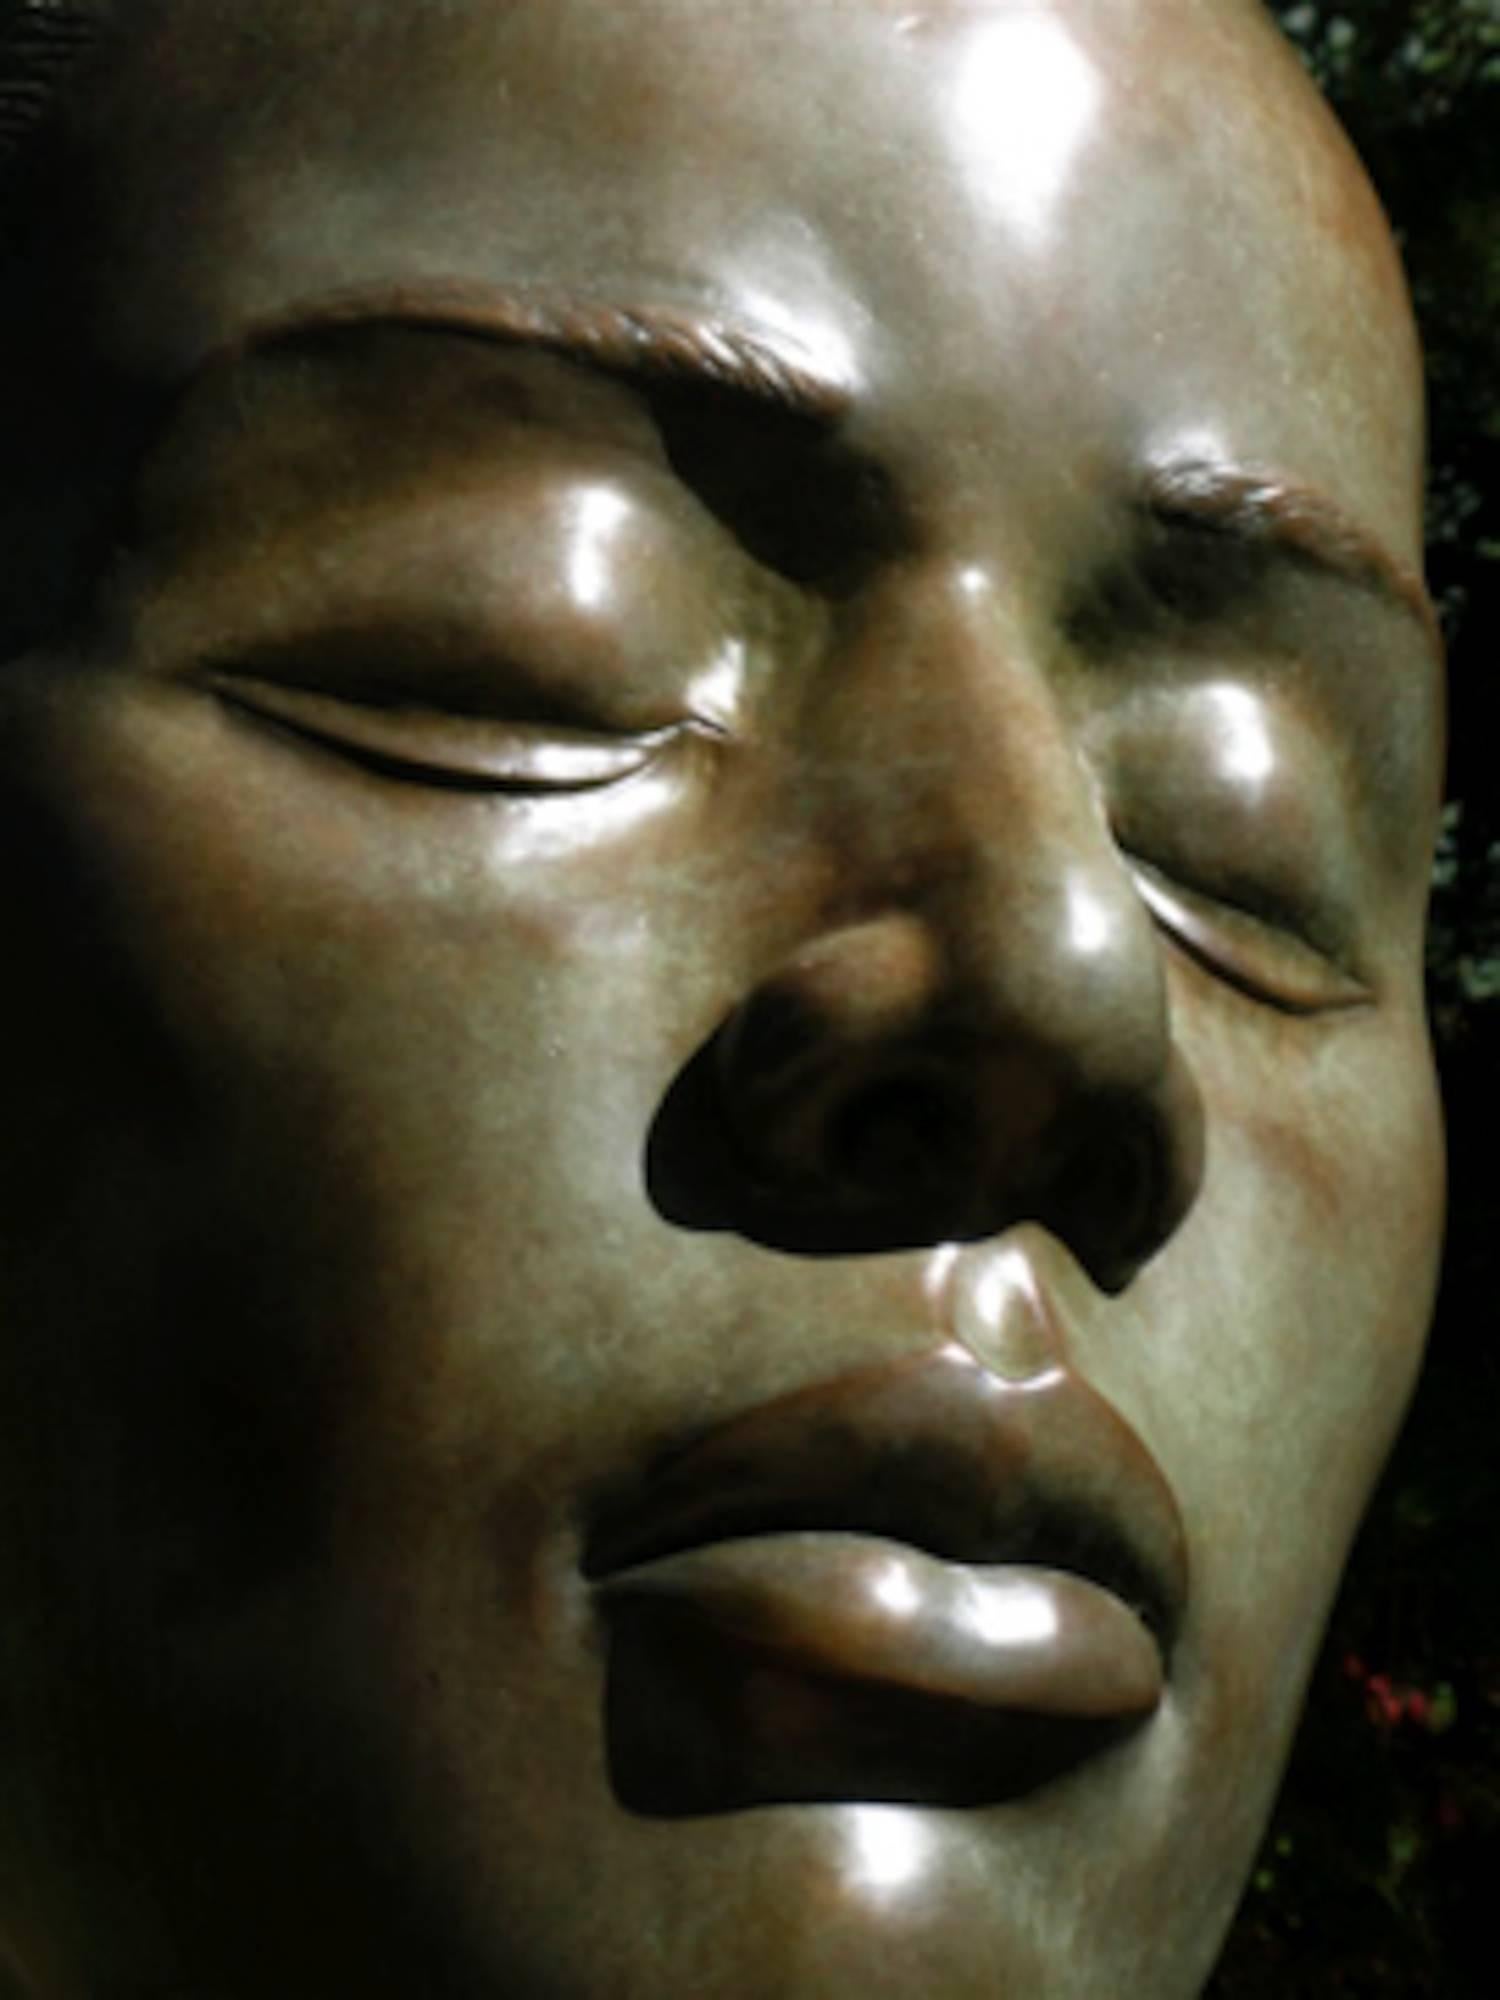 Reflections, bronze female bust sculpture contemplative peaceful Troy Williams

Sculptor Troy Williams unites the timeless and the contemporary in sculptures of rare beauty and meaning
Beyond all the narrative potential of the three obvious physical